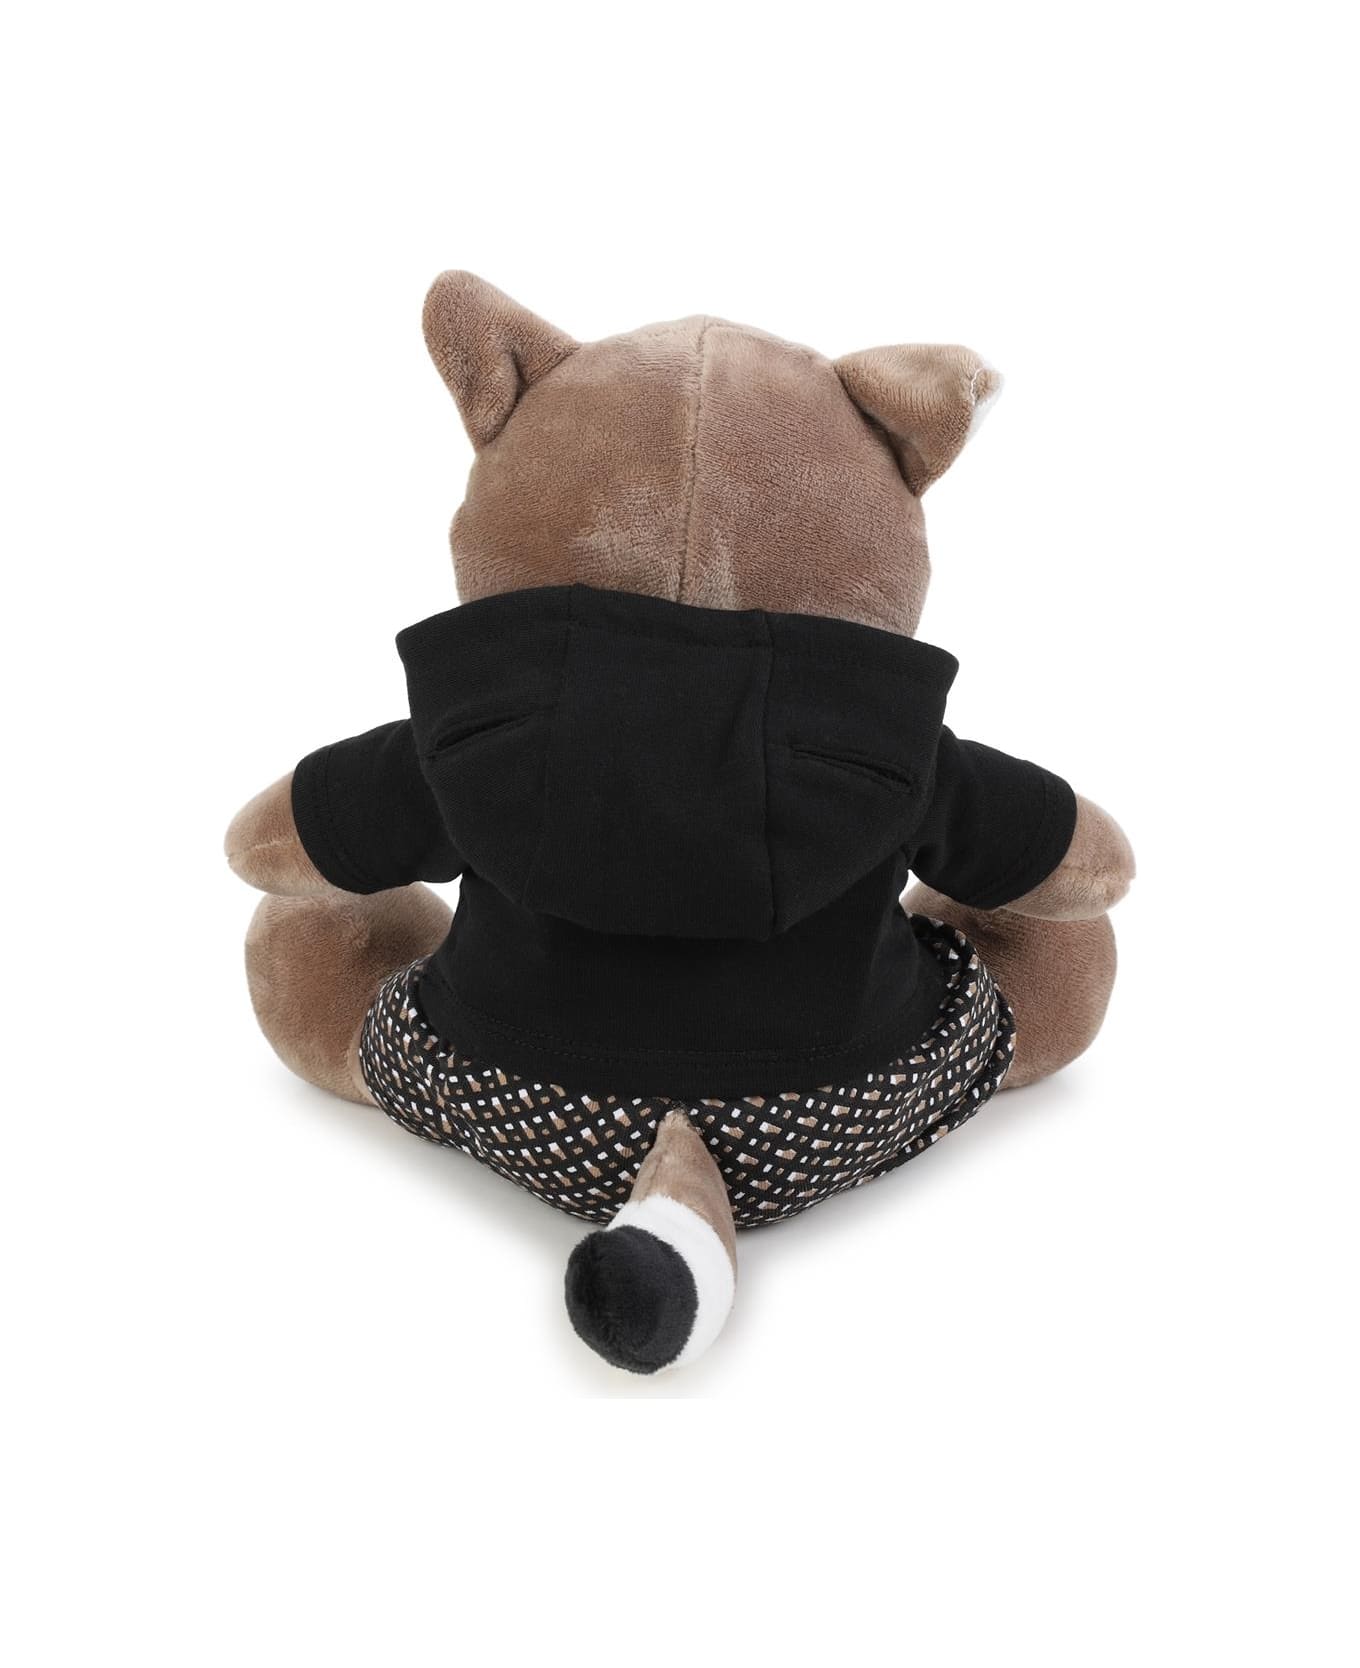 Hugo Boss Red Panda Plush With Embroidery - Beige